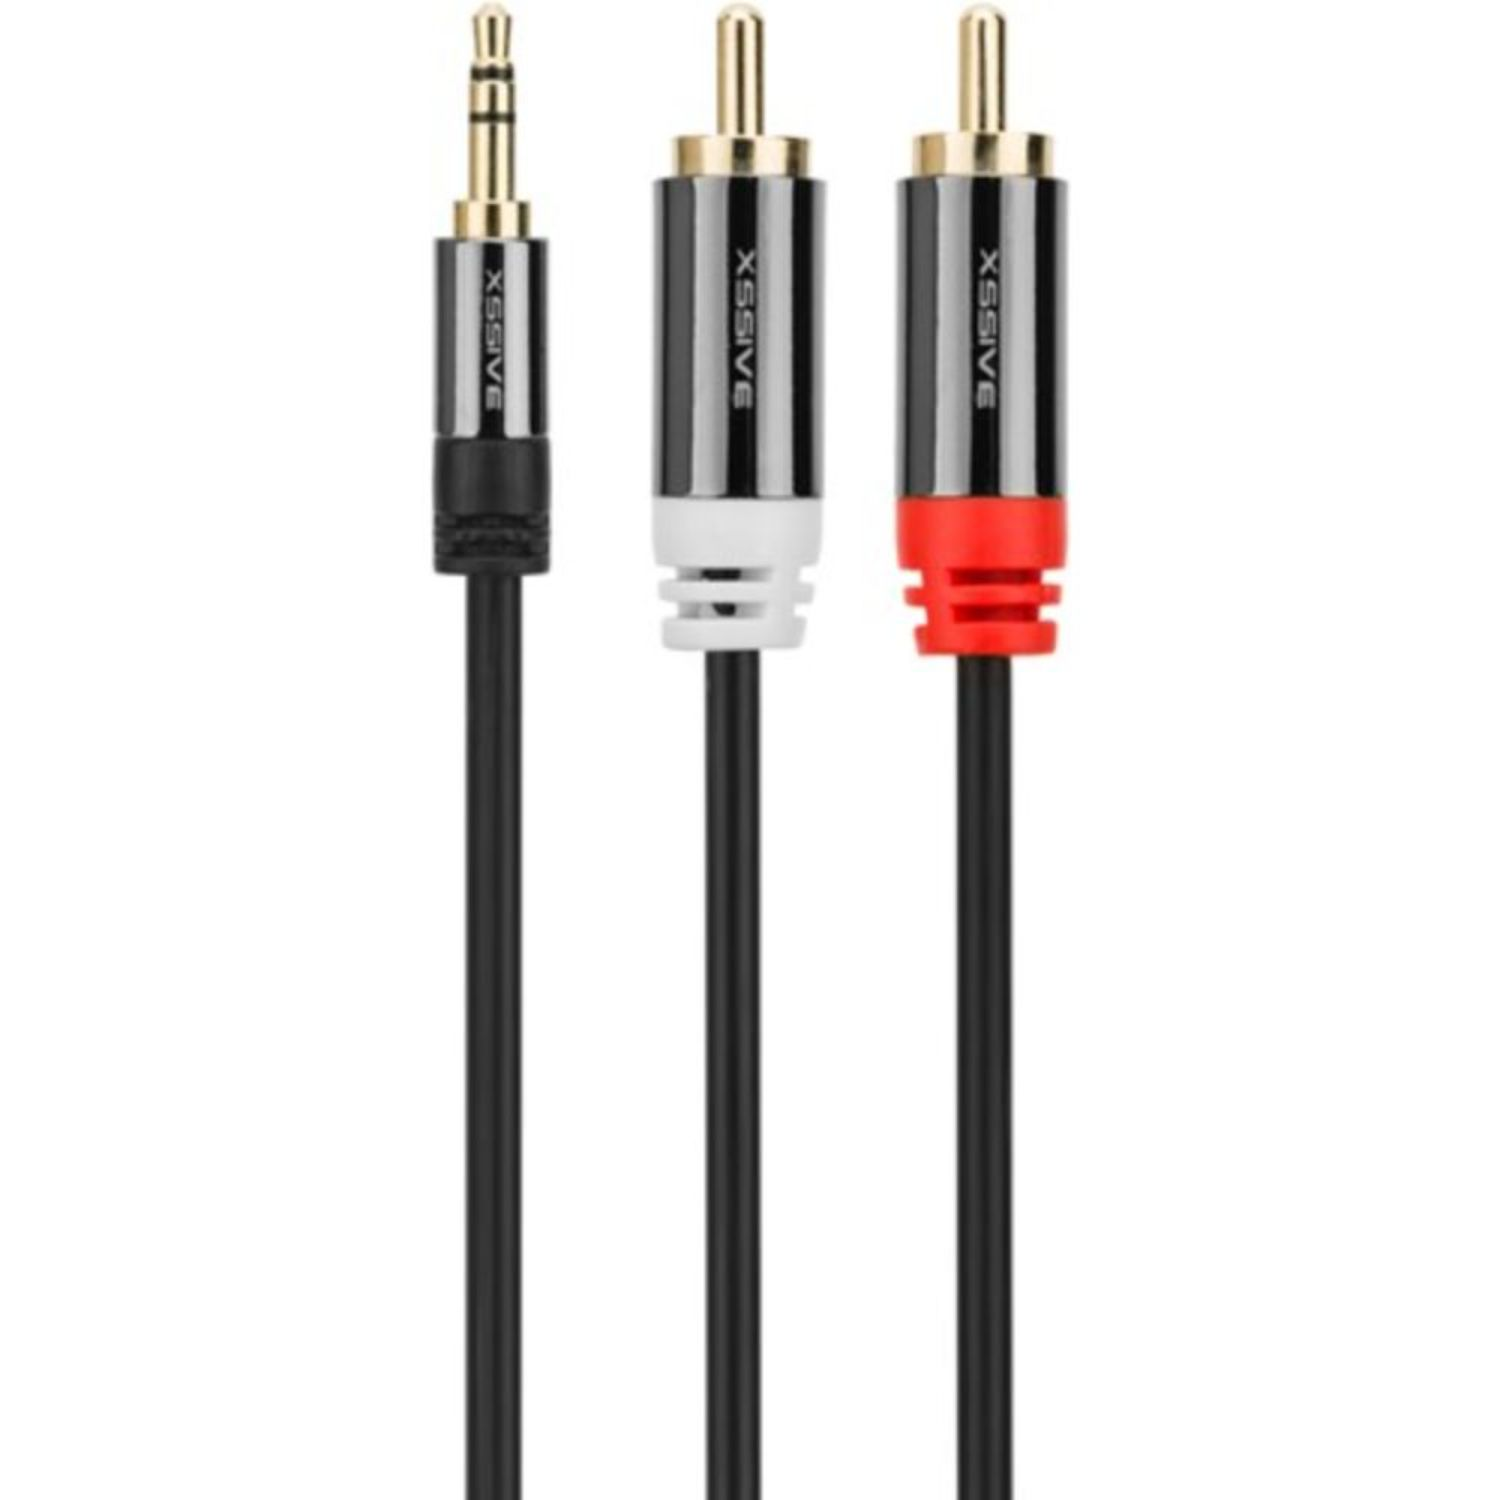 RCA Schwarz to COFI 3.5MM 2 Cable1.8M Adapter,